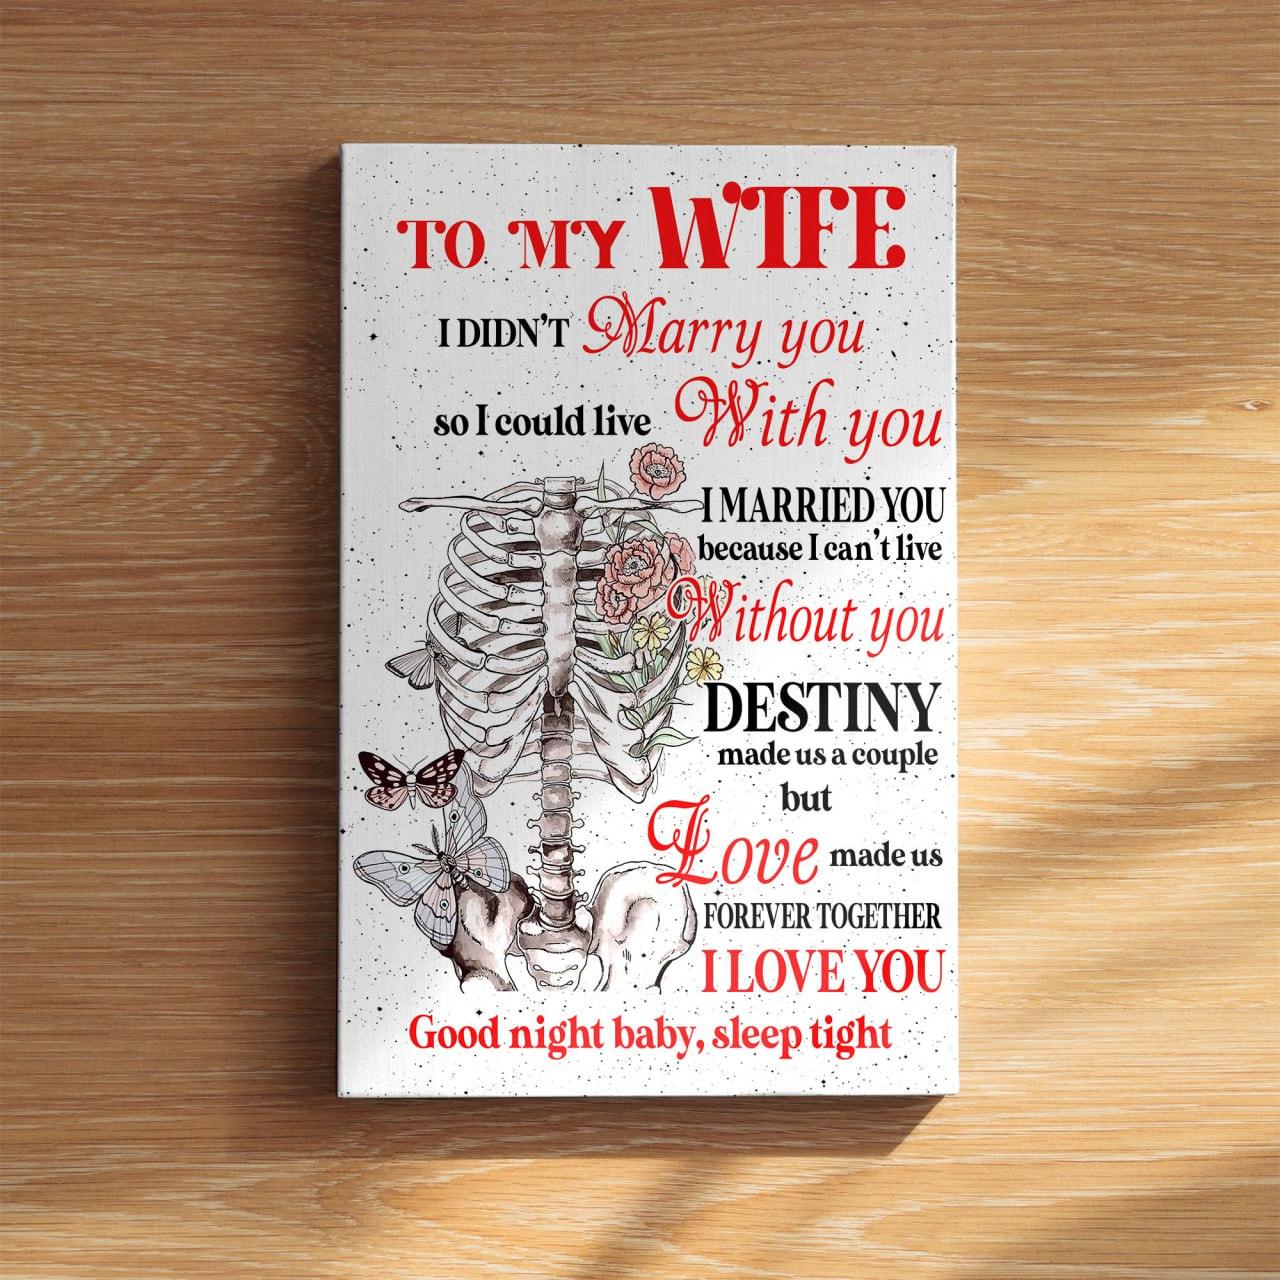 Without You Destiny - Classic Canvas For Valentines - Wonder Skull